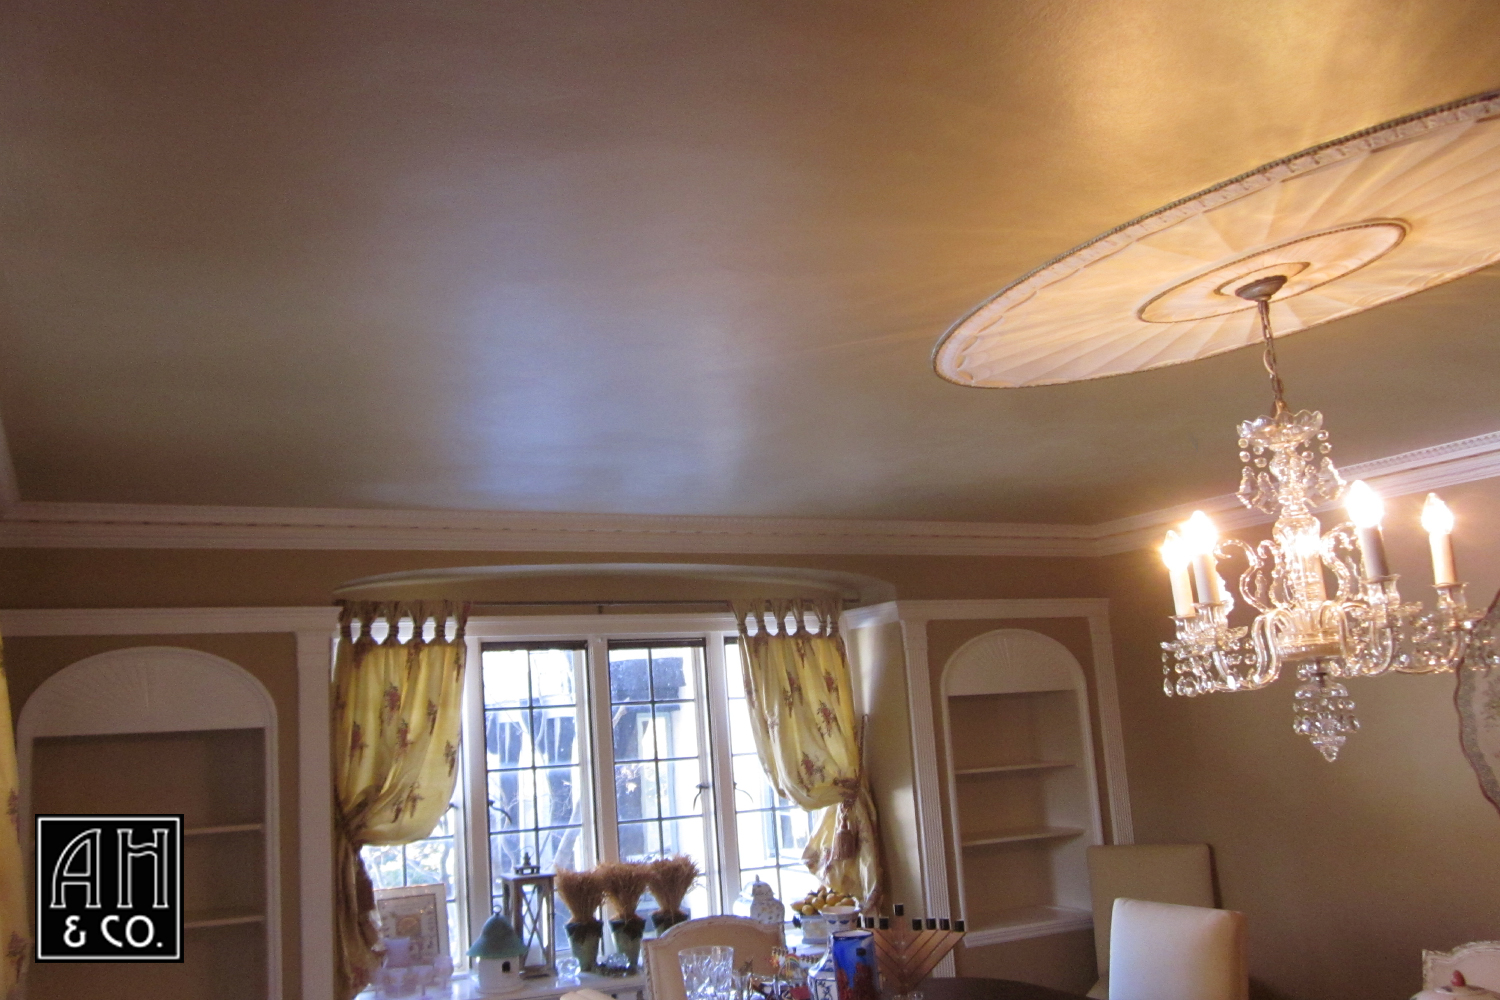 Ceiling Finishes Ah Co Decorative Artisans